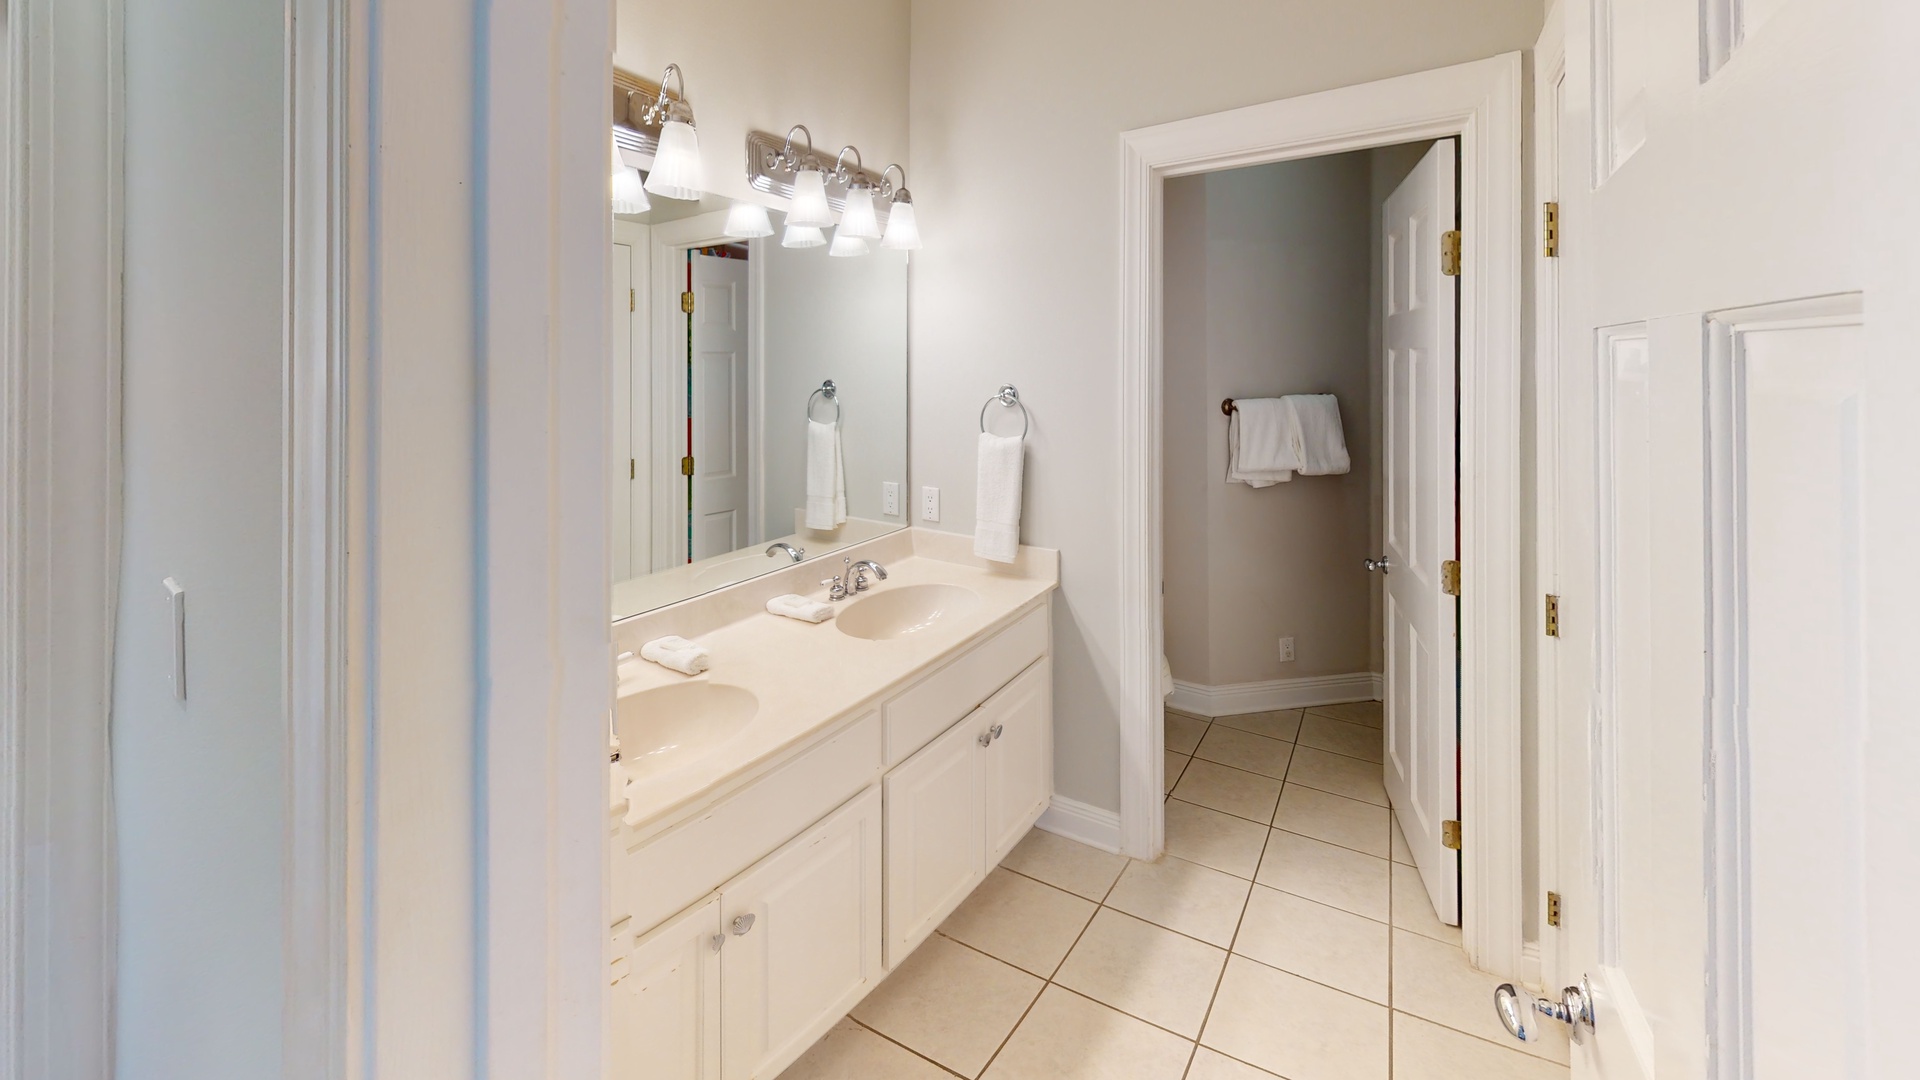 2nd floor shared hall bath with a double vanity and tub/shower combo